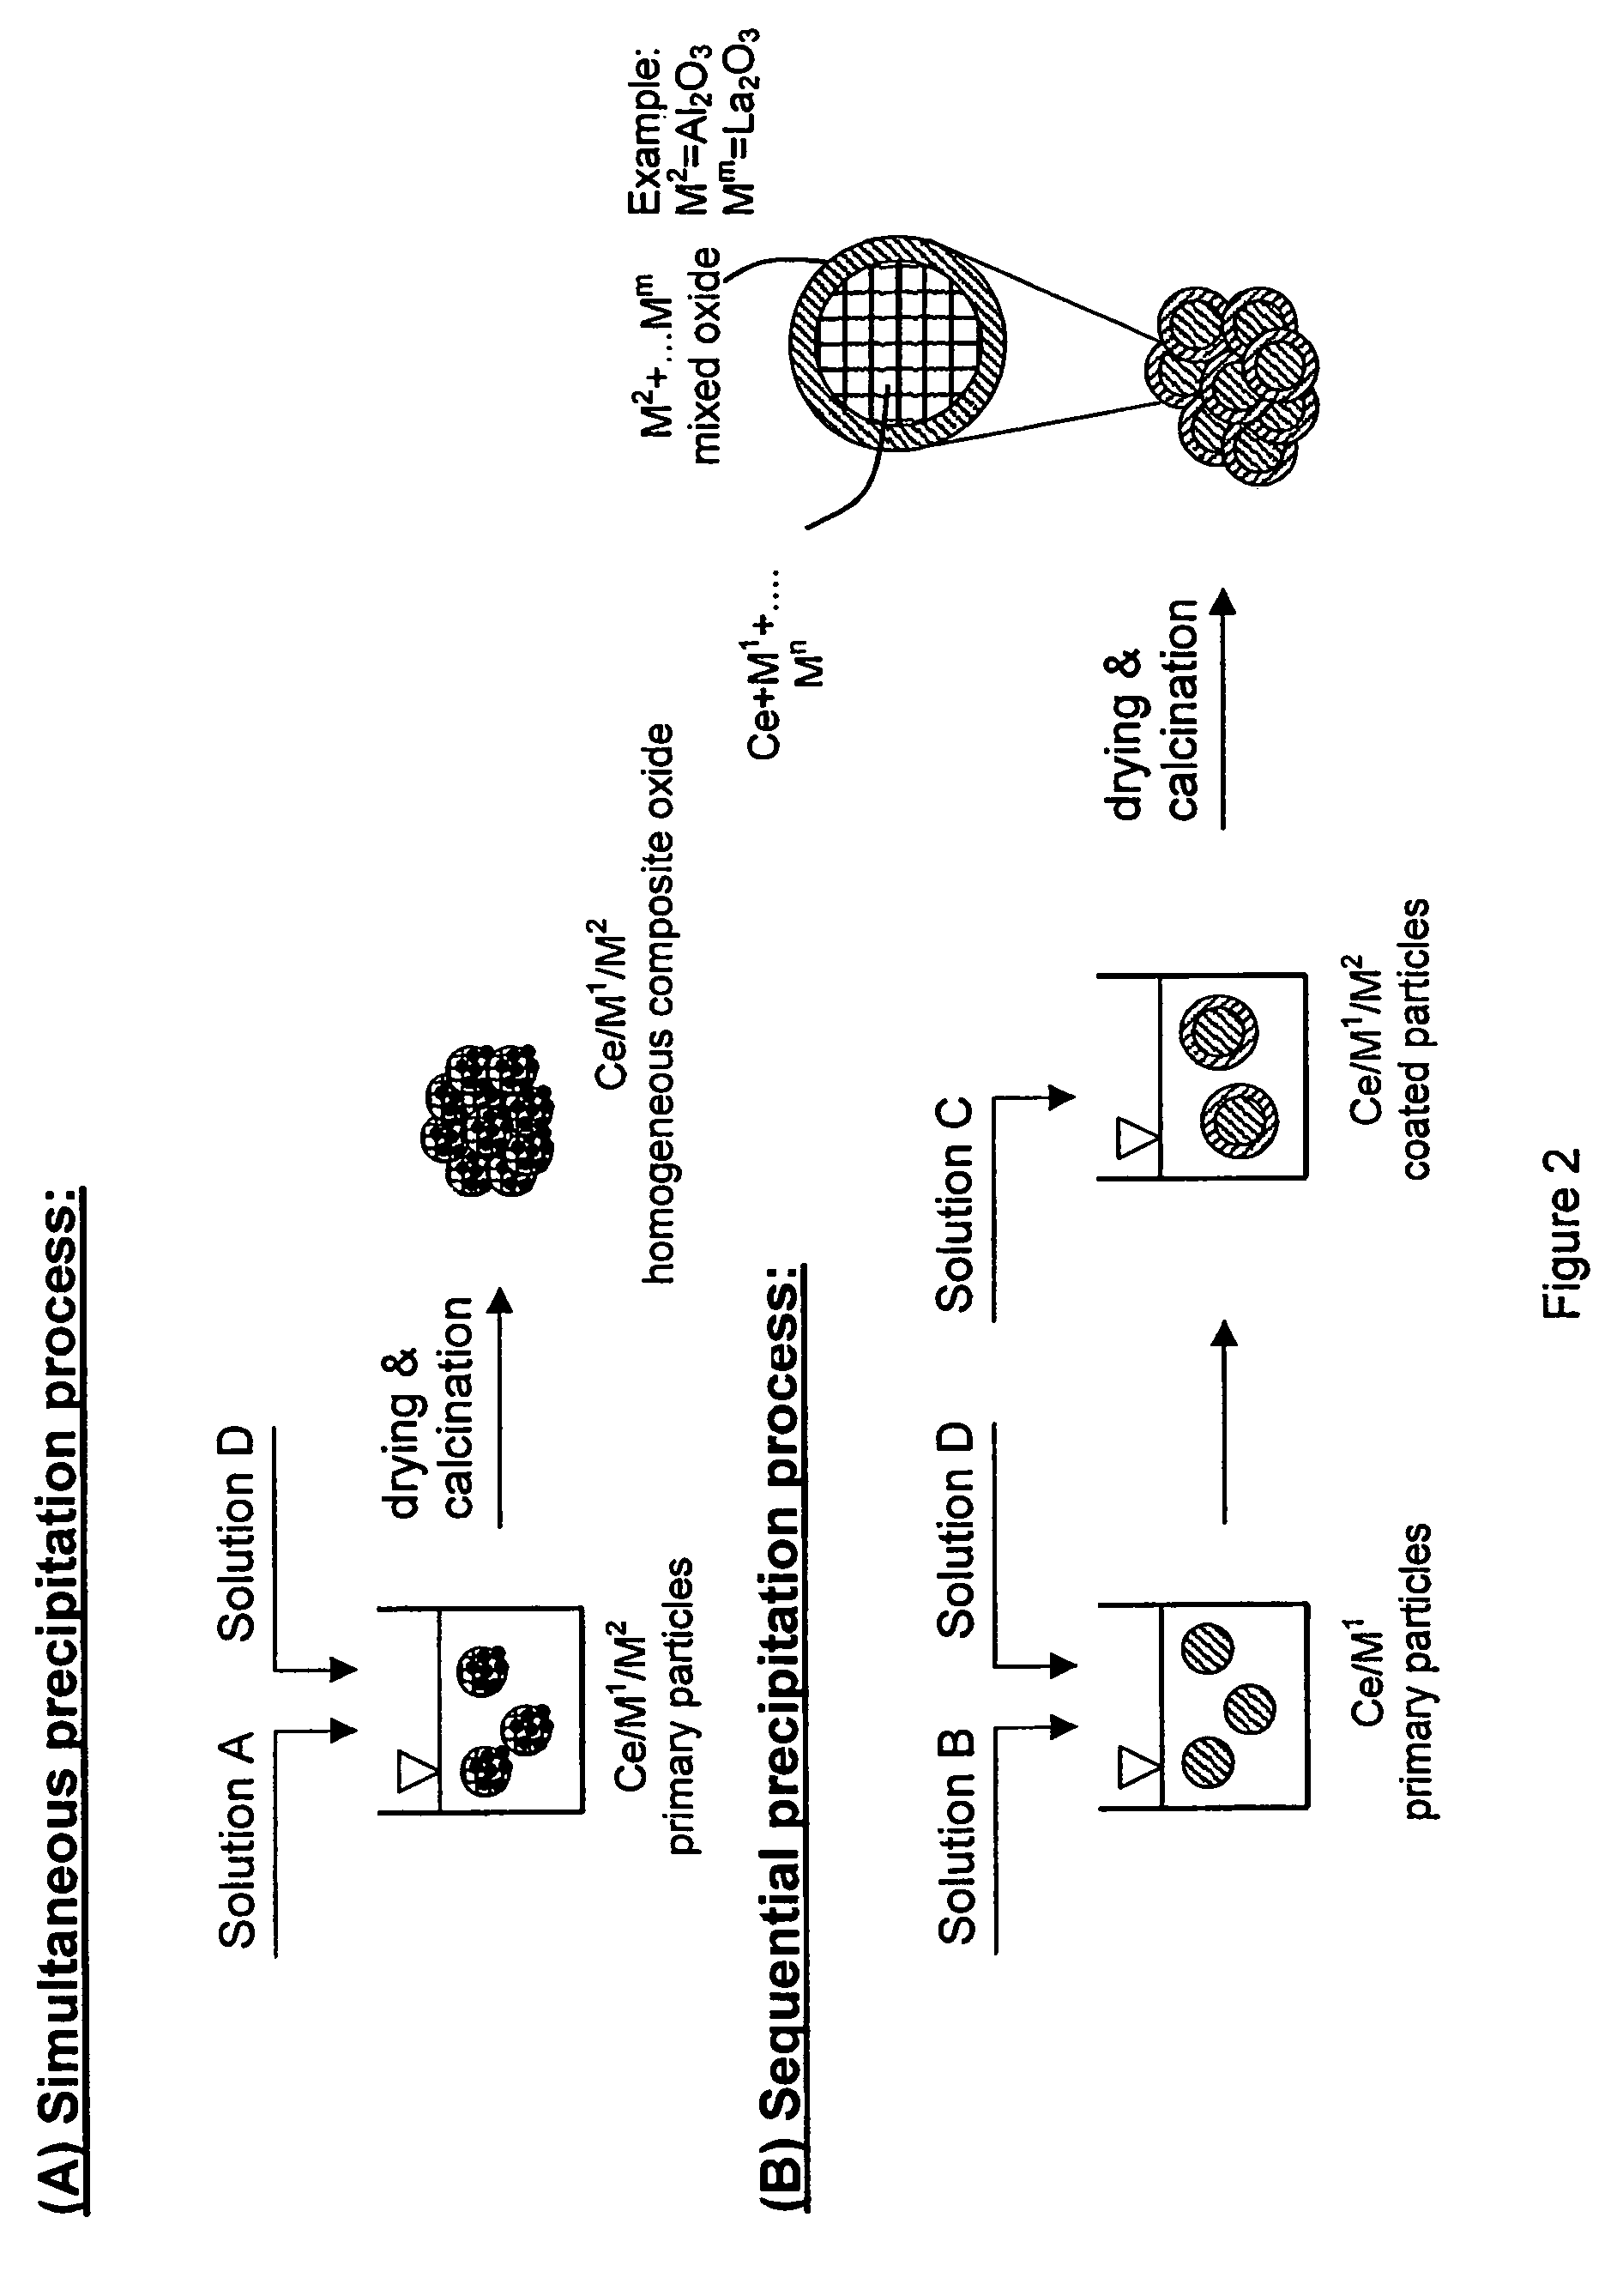 Oxygen storage material, process for its preparation and its application in a catalyst